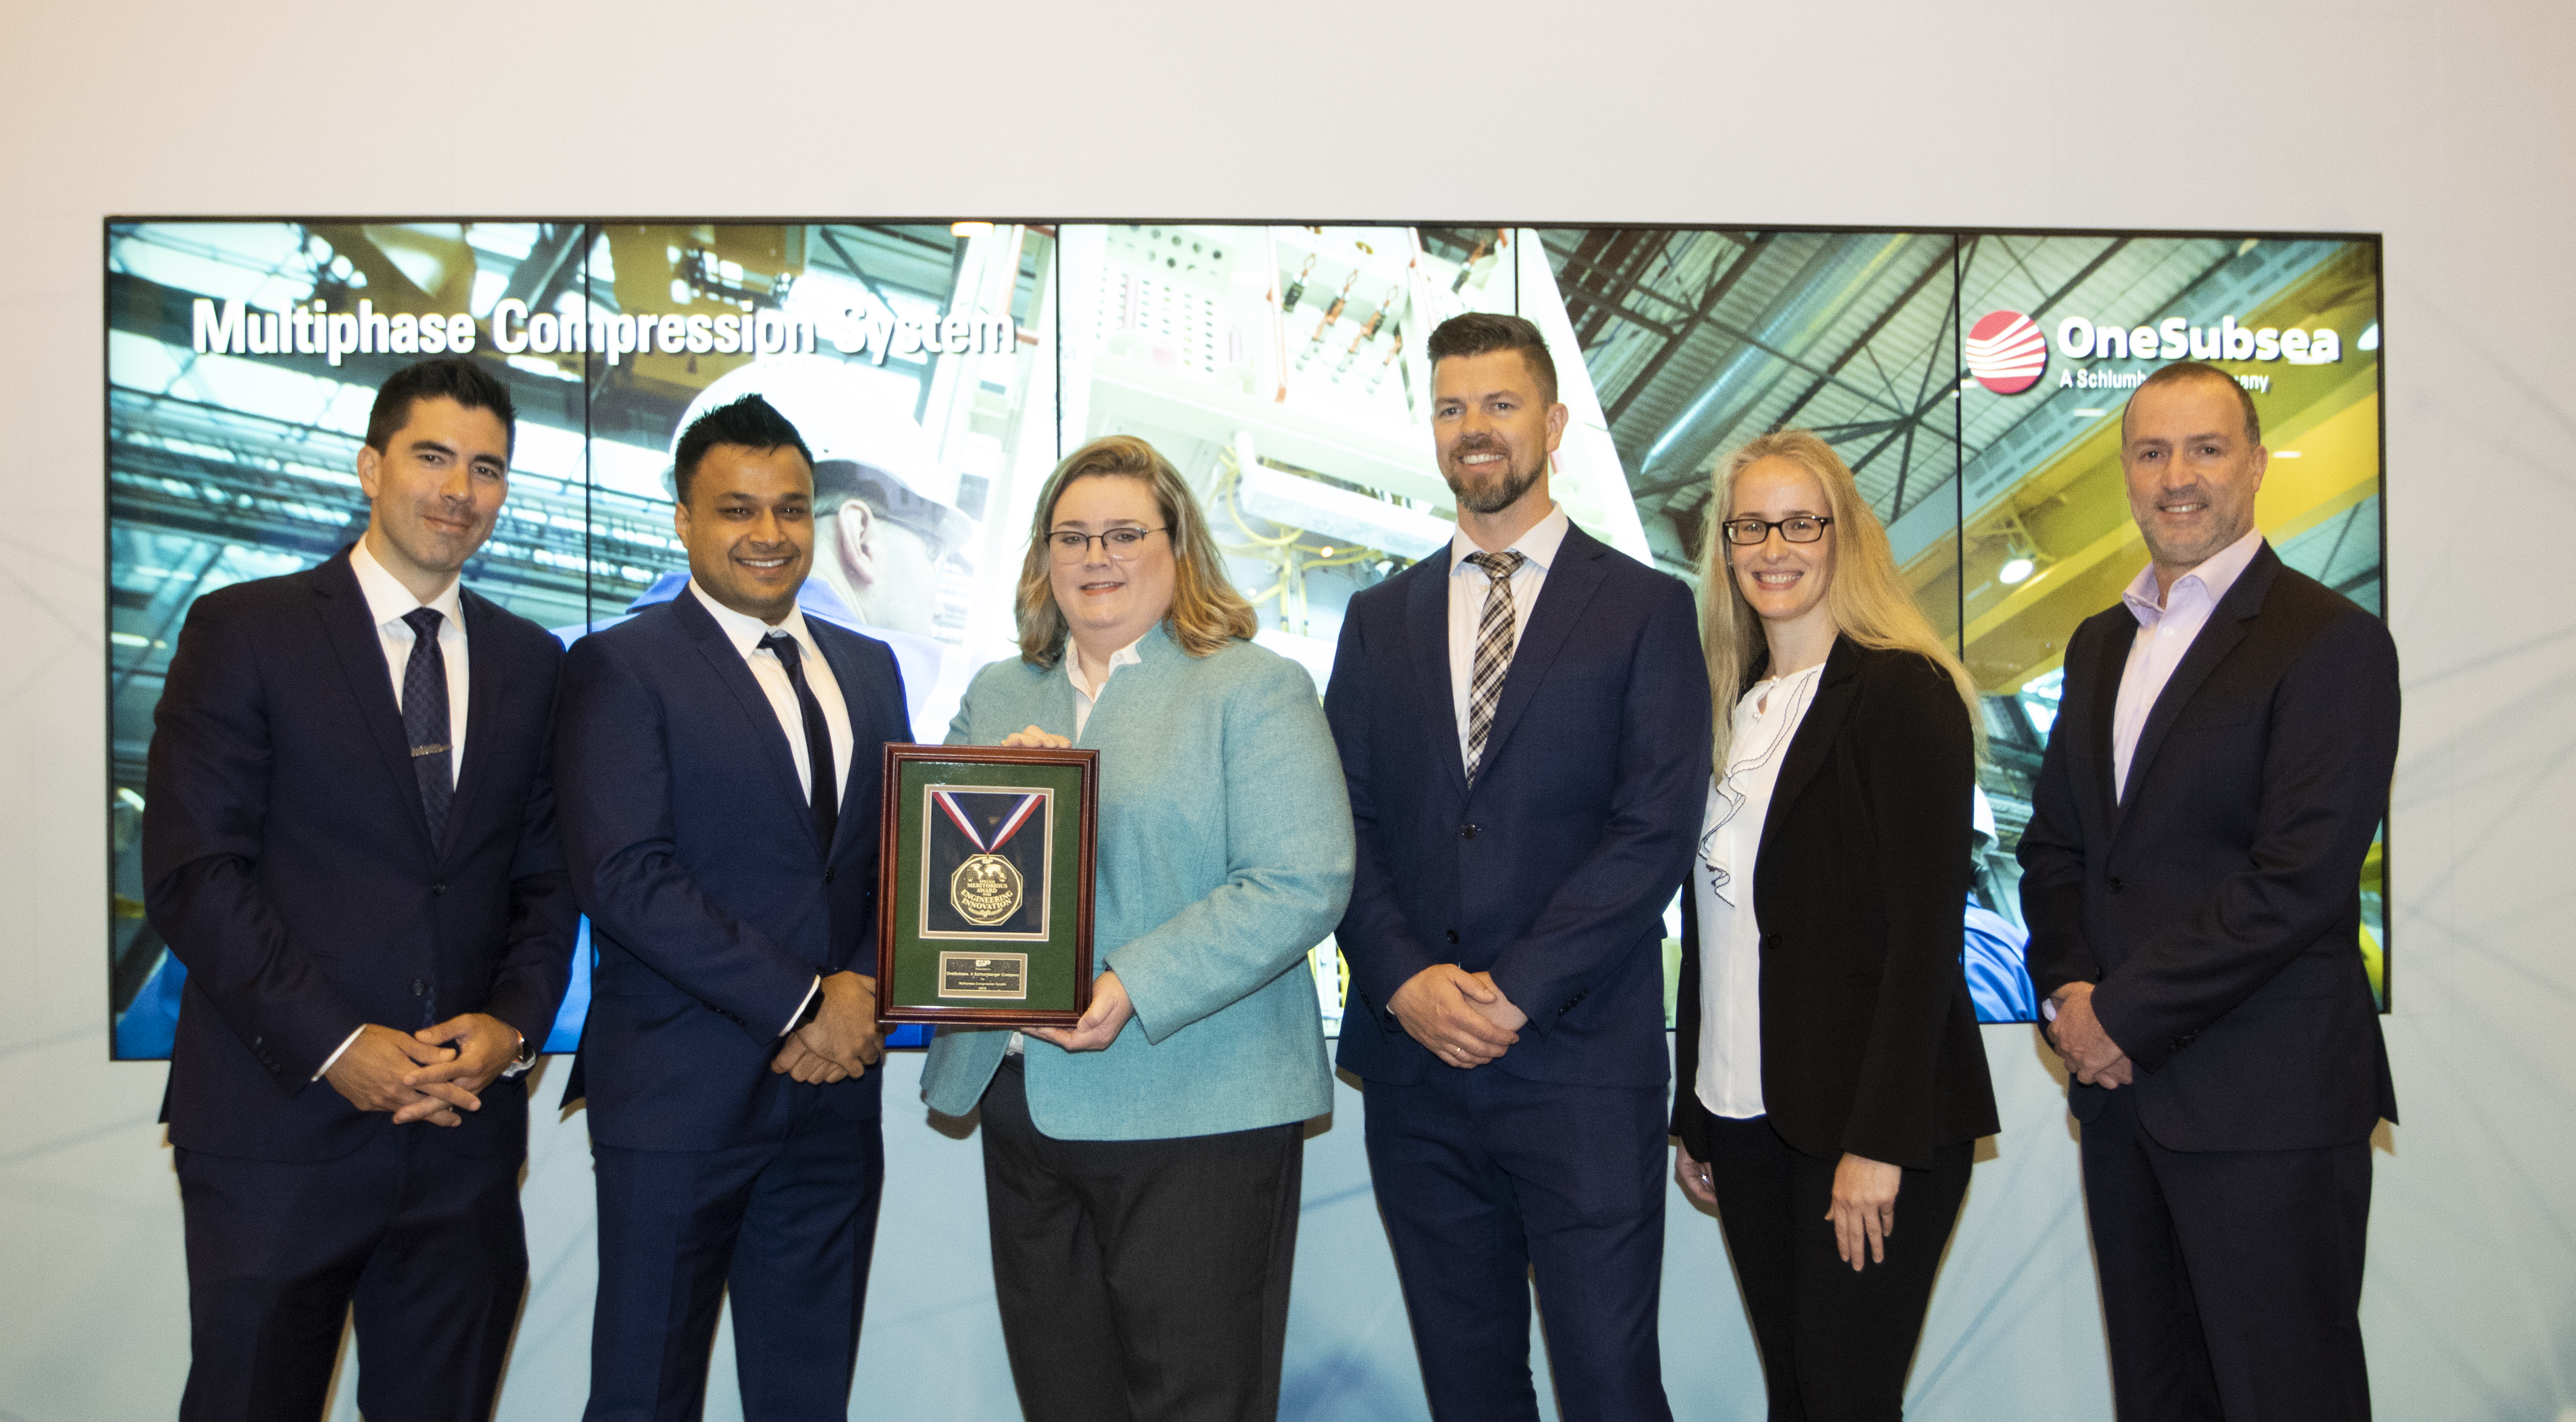 The Multiphase Compression System from OneSubsea, a Schlumberger company, won in the subsea systems category. E&P’s Jennifer Presley (third from the left) presented the award to (from left to right) Mads Hjelmeland, Akshay Kalia, Hans Fredrik Kjellnes, Lucile Turpin and Ben Charbit.